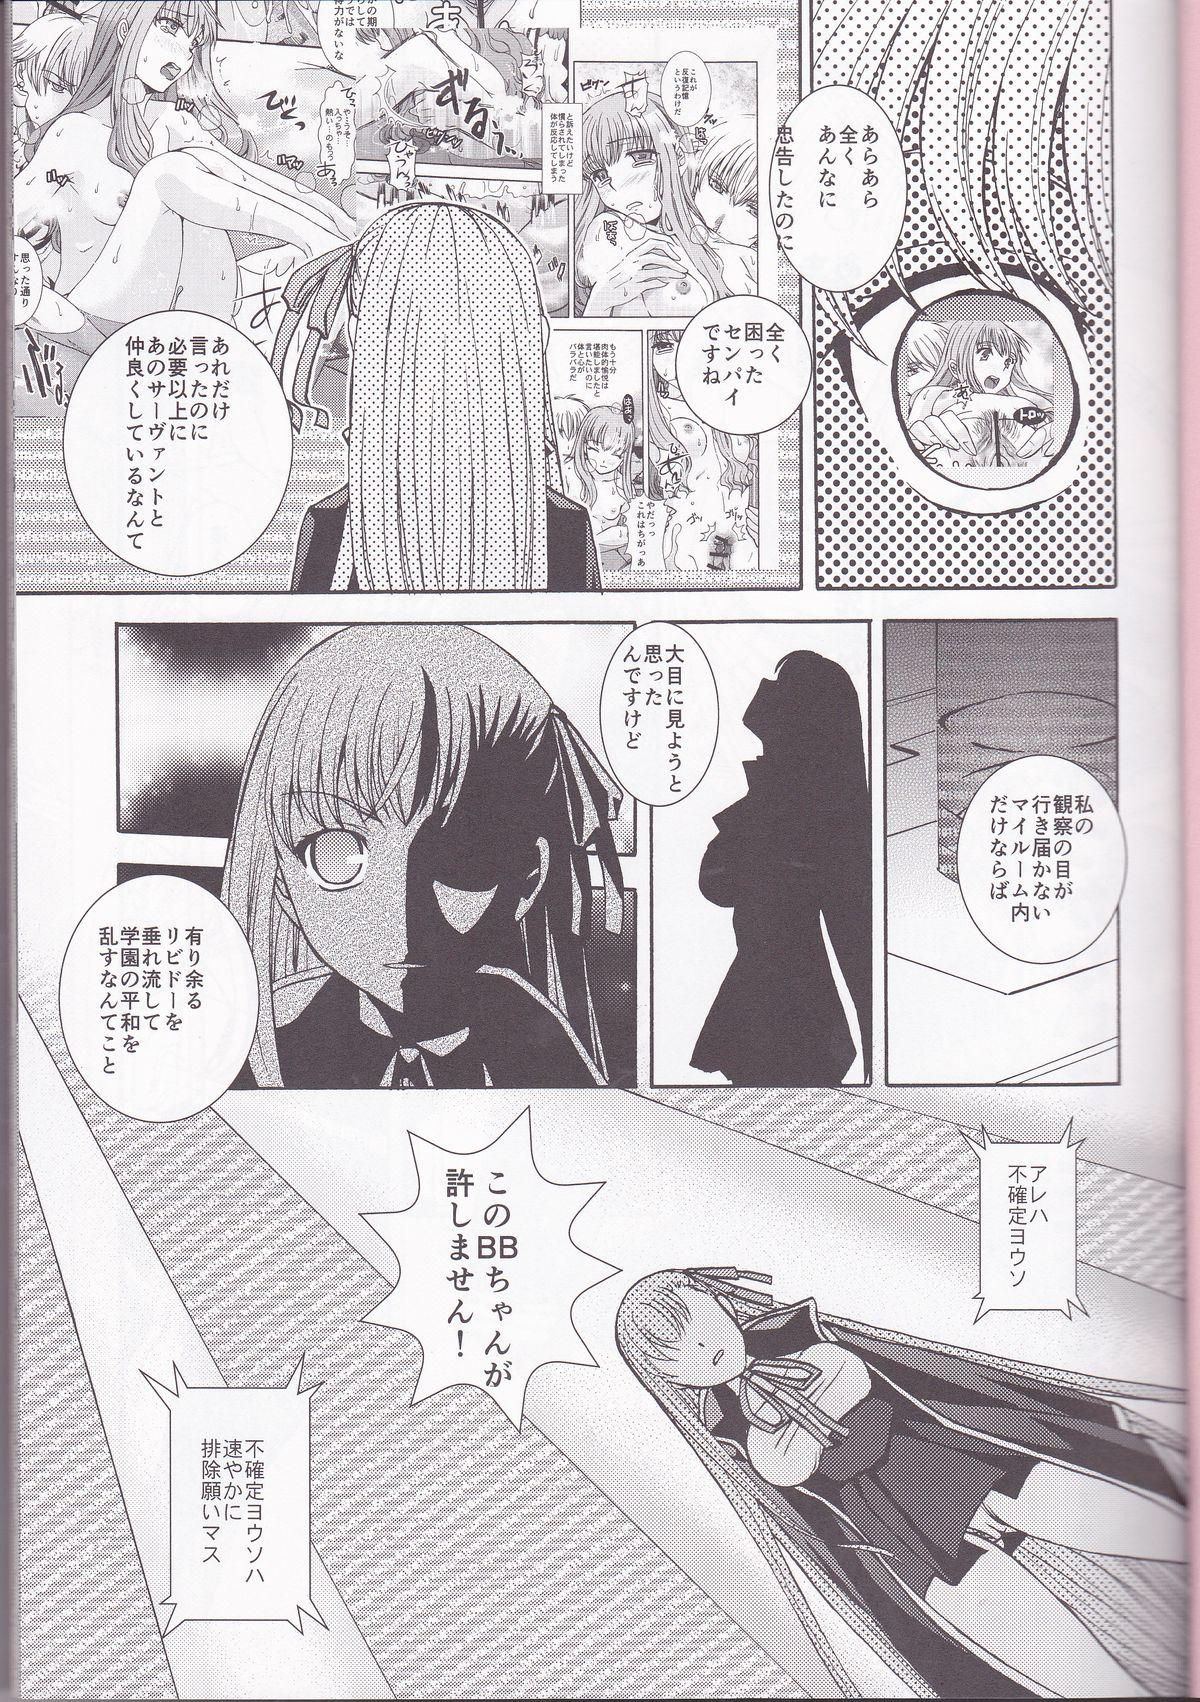 Spy Camera IT BLOOMS AND FALLS. - Fate extra Ejaculation - Page 3